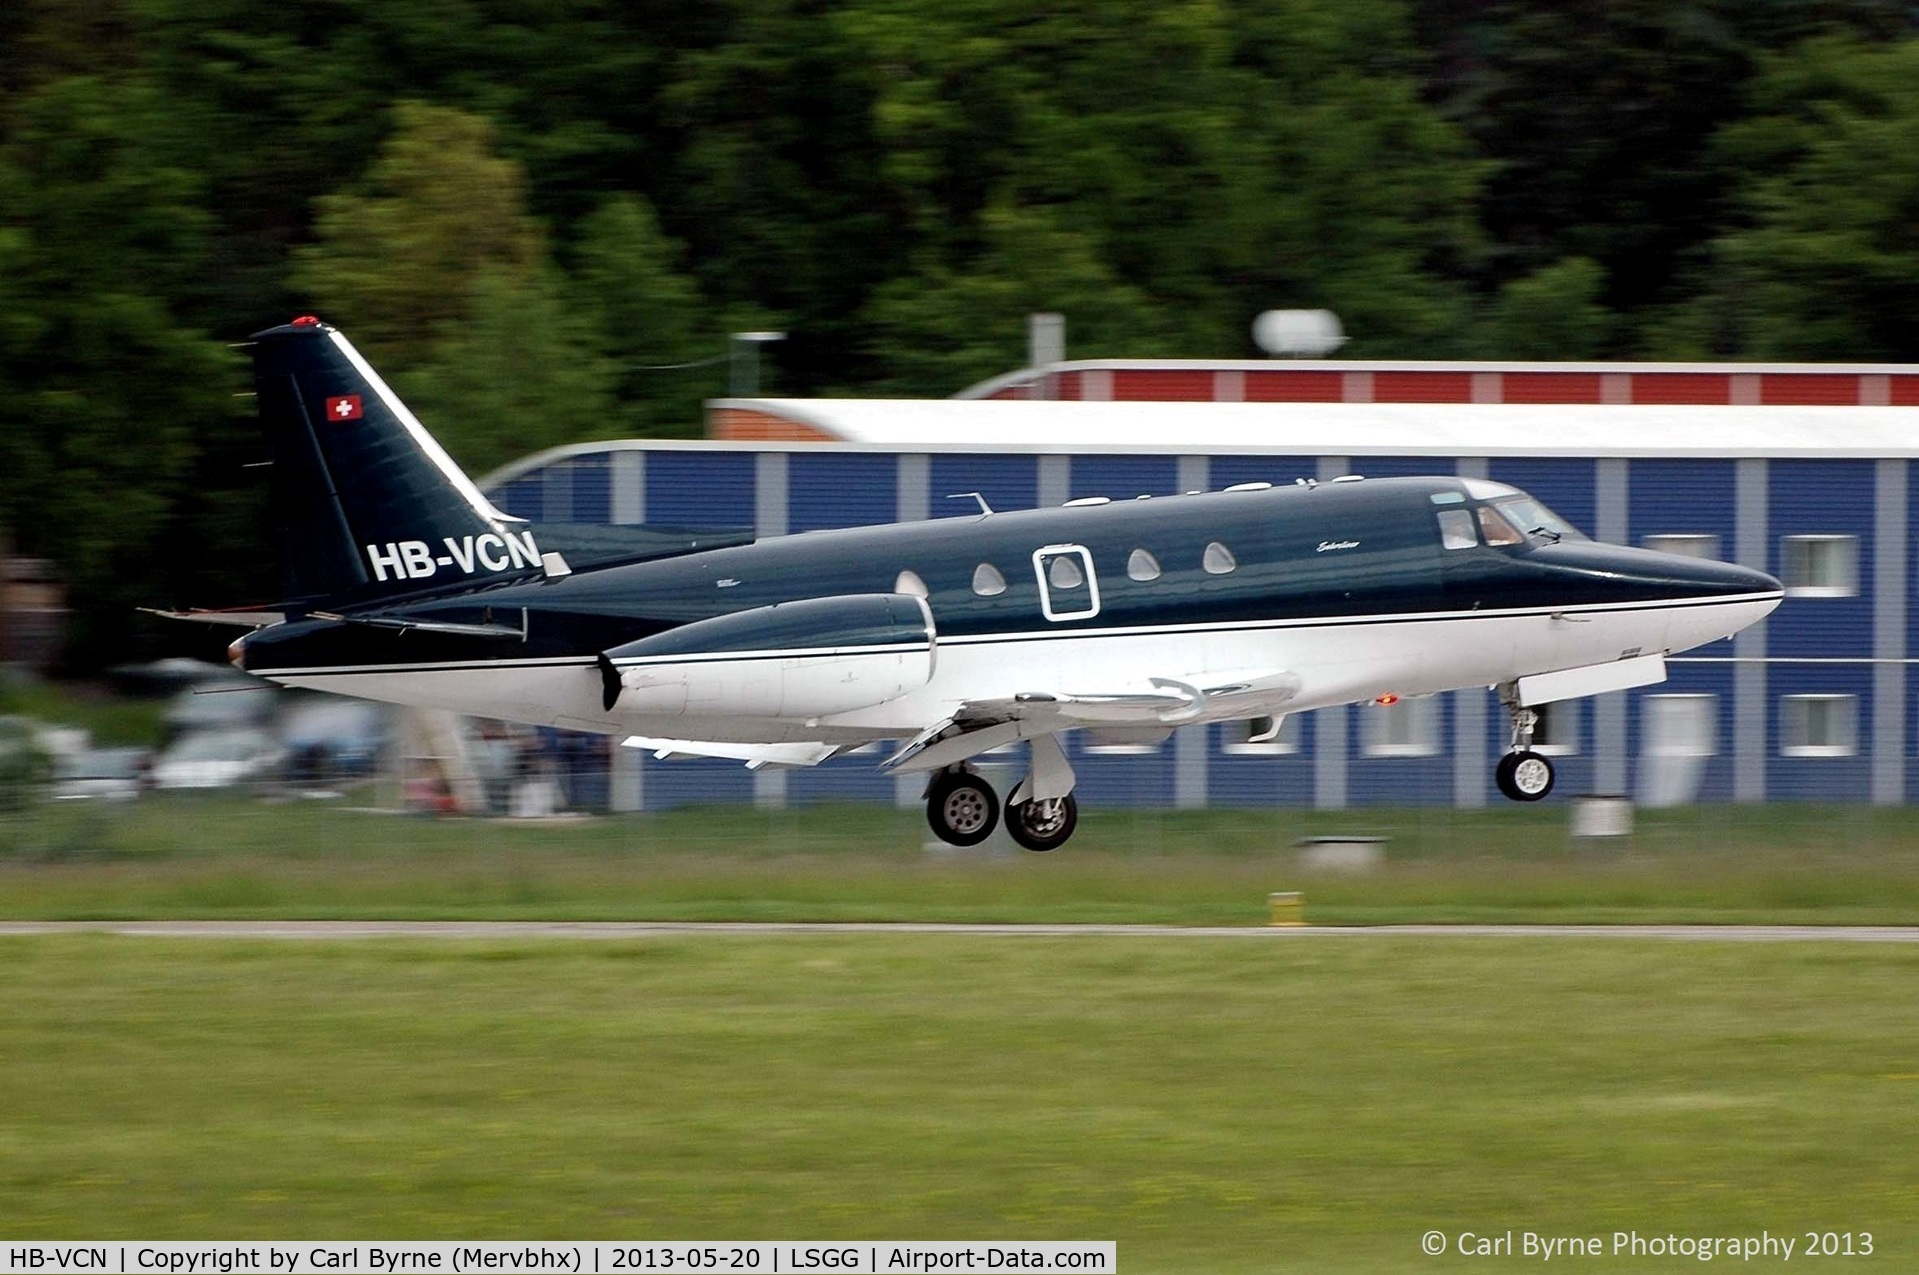 HB-VCN, 1980 Rockwell International NA-265-65 Sabreliner 65 C/N 465-32, Taken from the park at the 05 threshold.